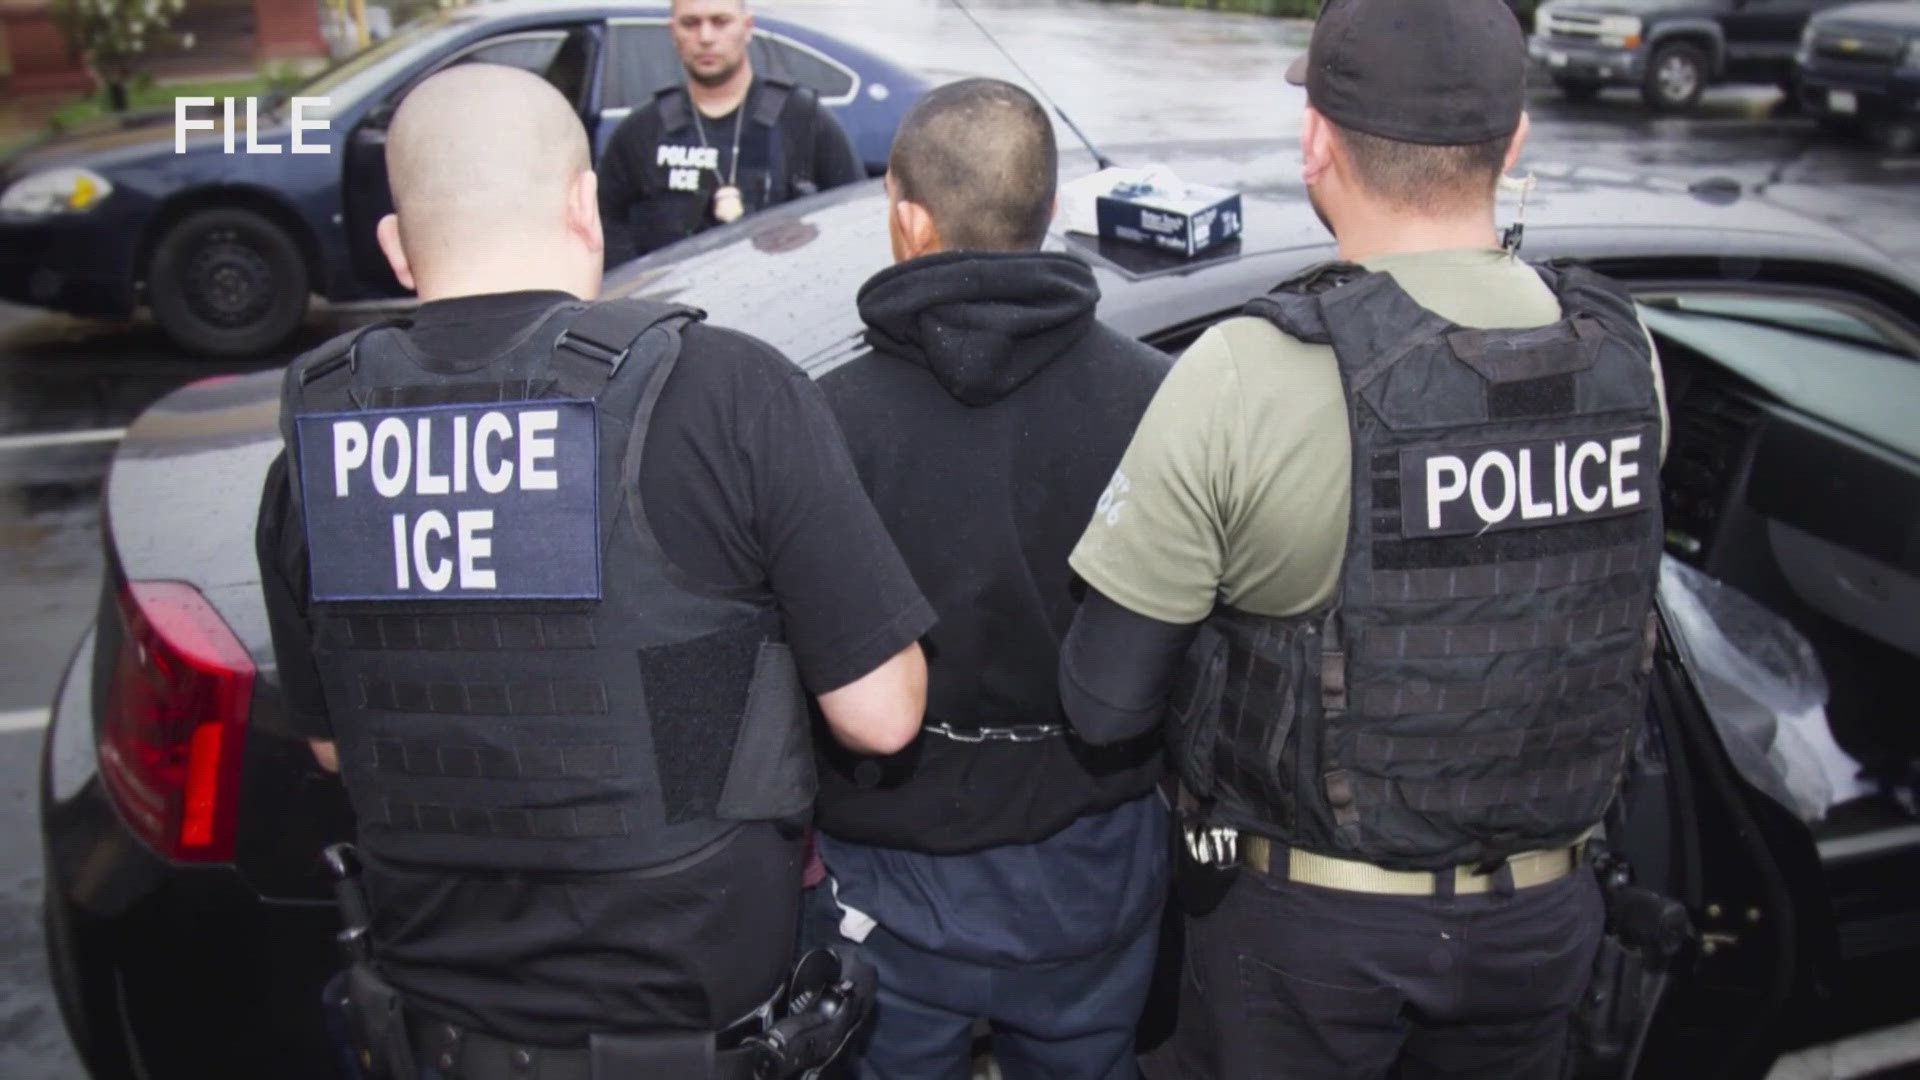 Montgomery County officials call the ICE criticism inaccurate and unfair because there are existing policies to coordinate with ICE on honoring detainers.